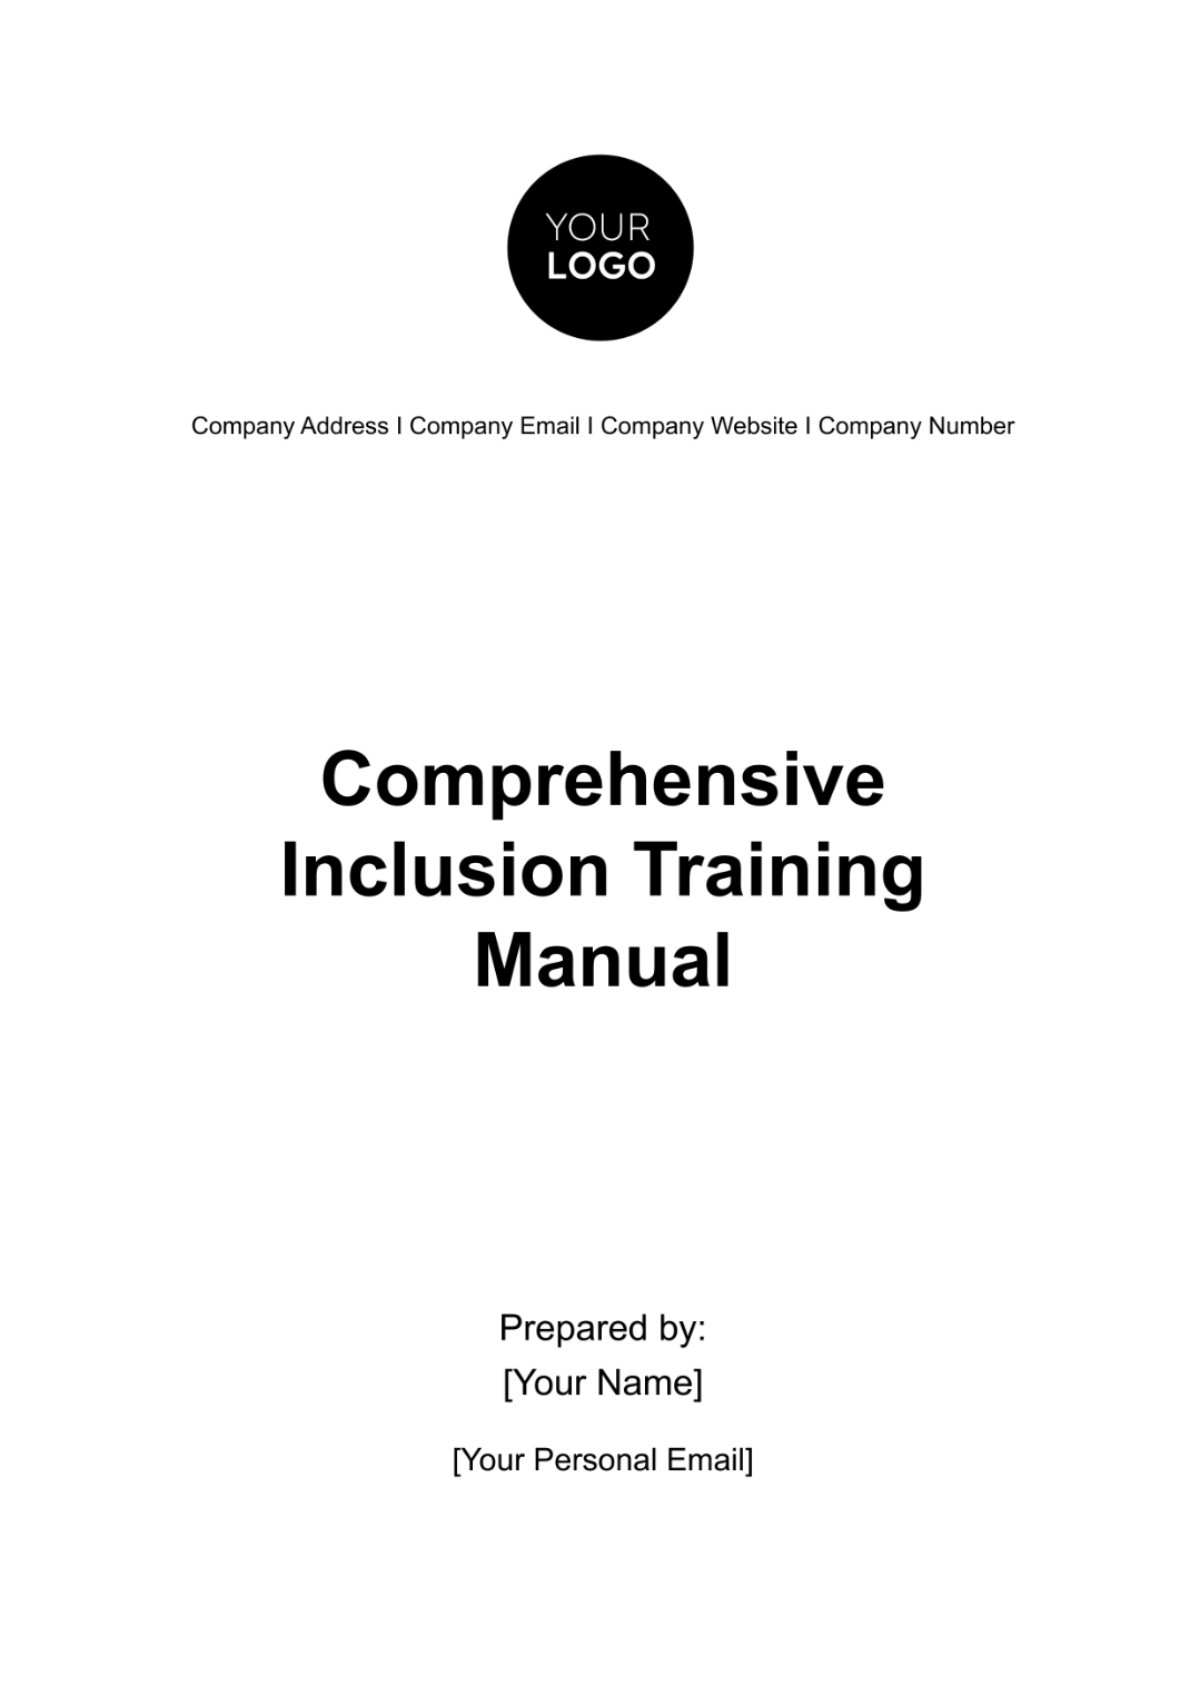 Free Comprehensive Inclusion Training Manual HR Template